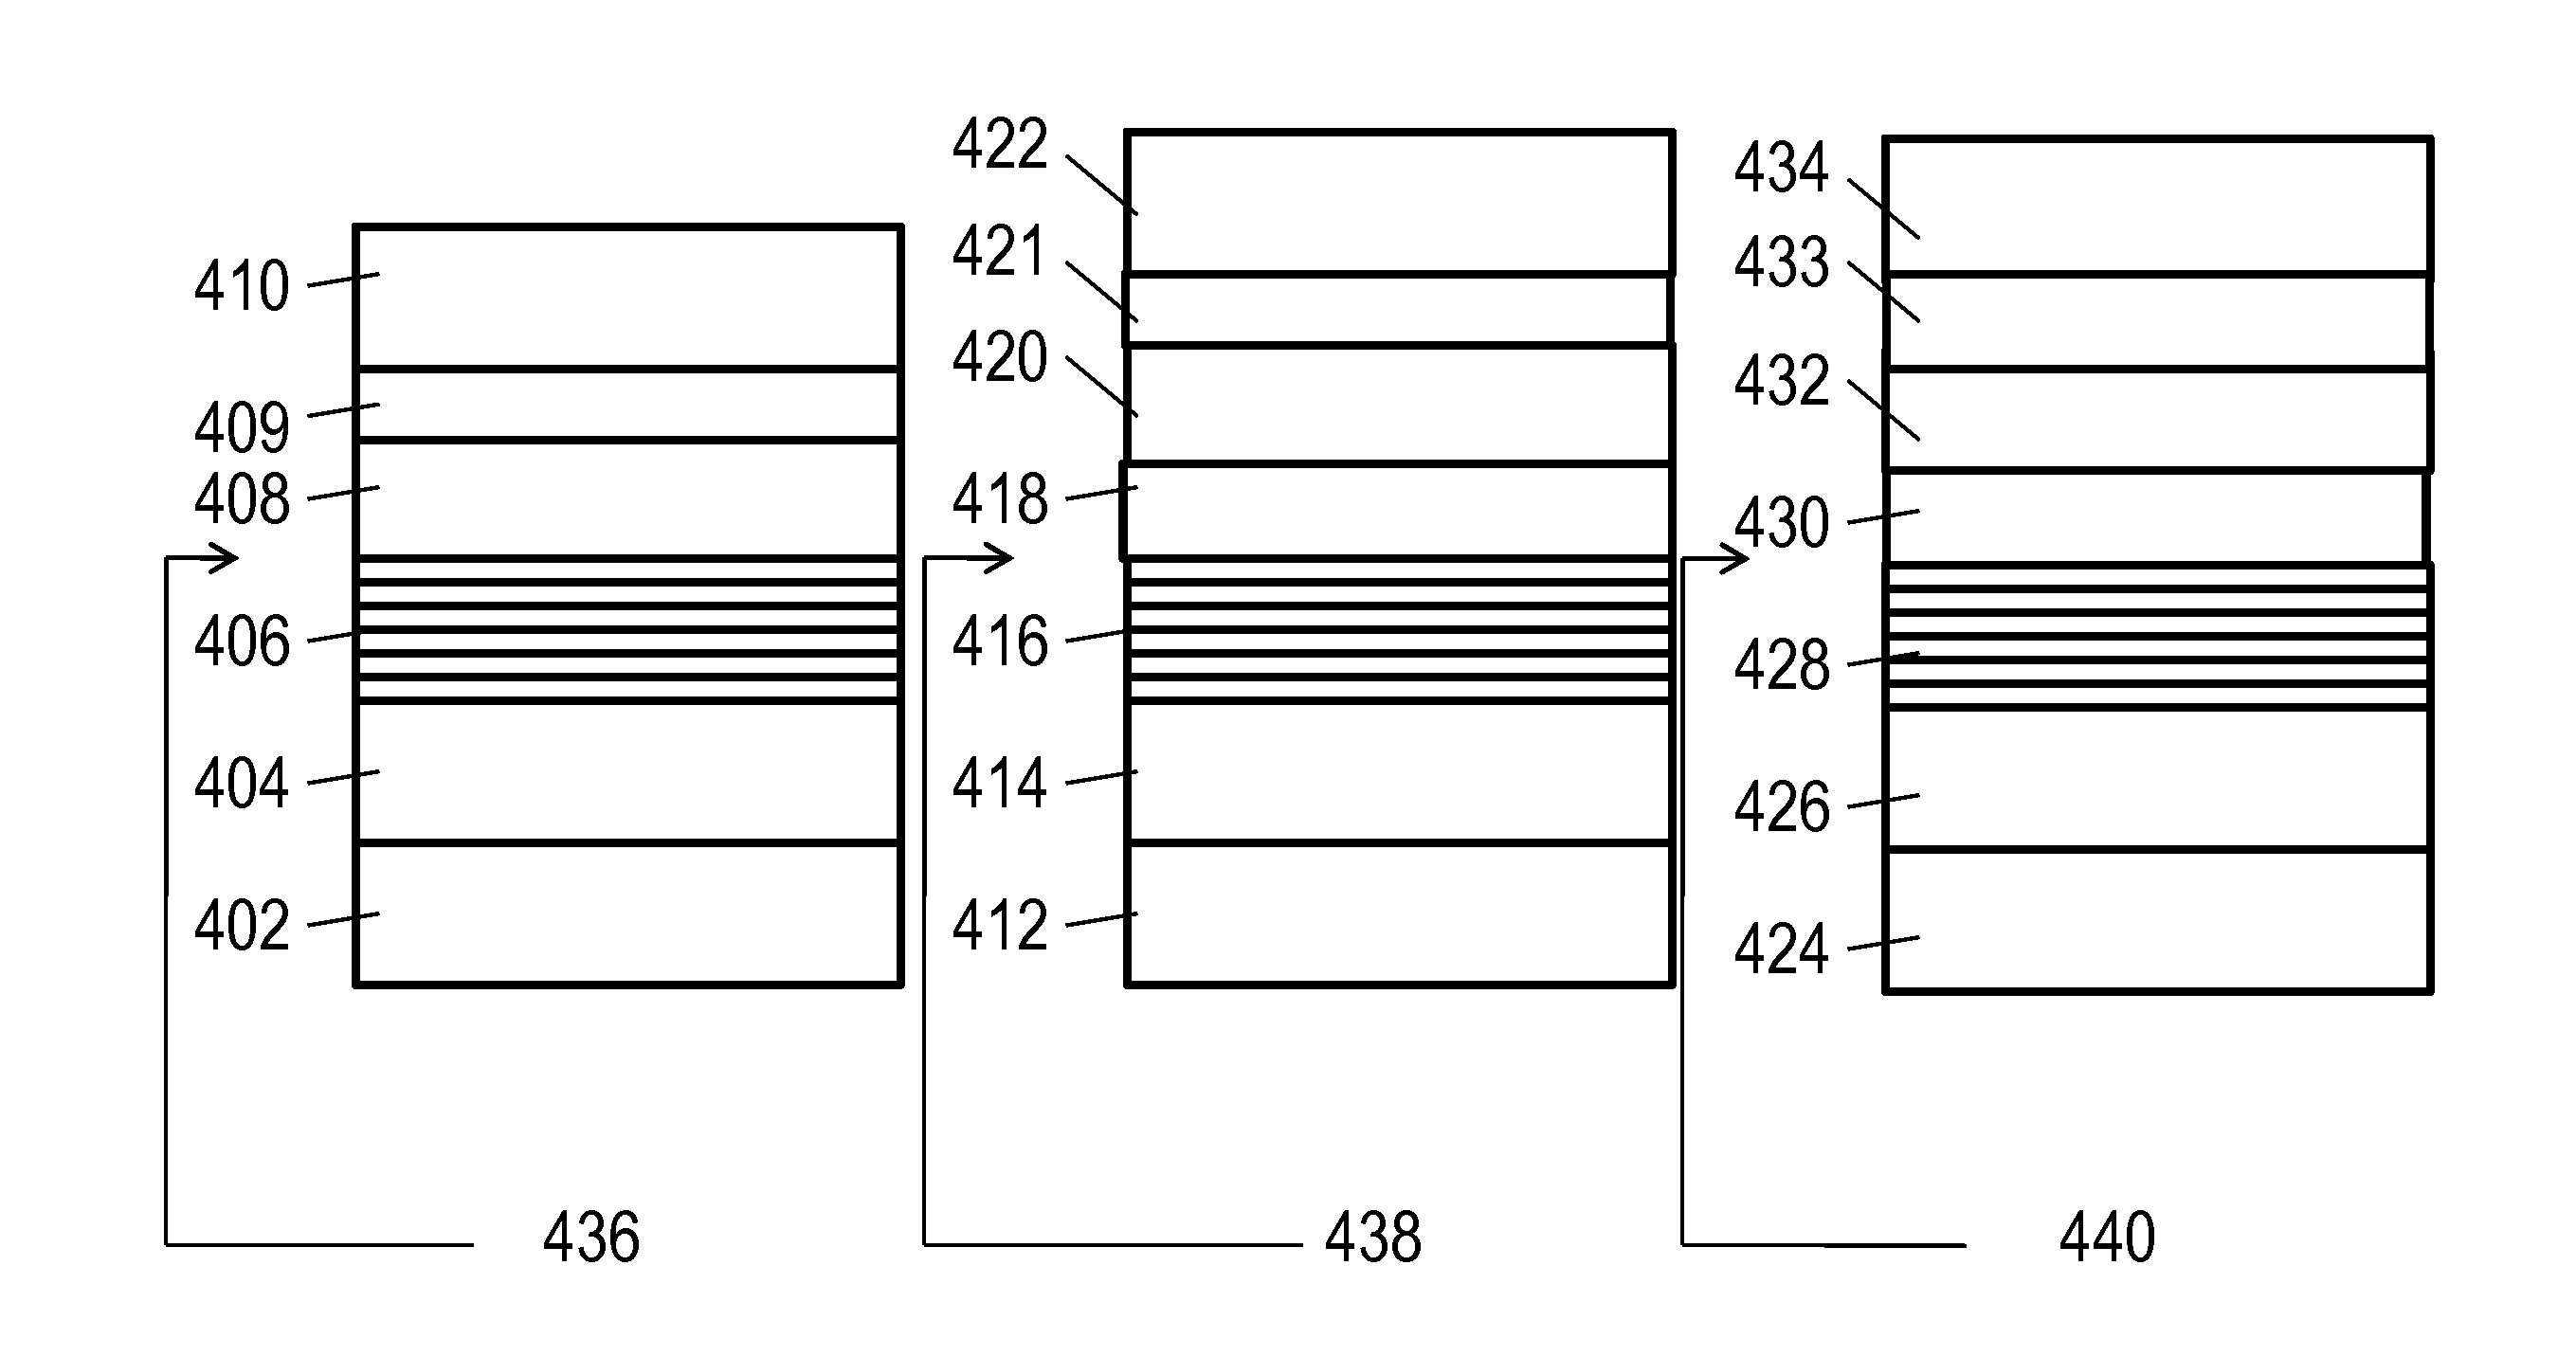 Method for fabricating novel semiconductor and optoelectronic devices